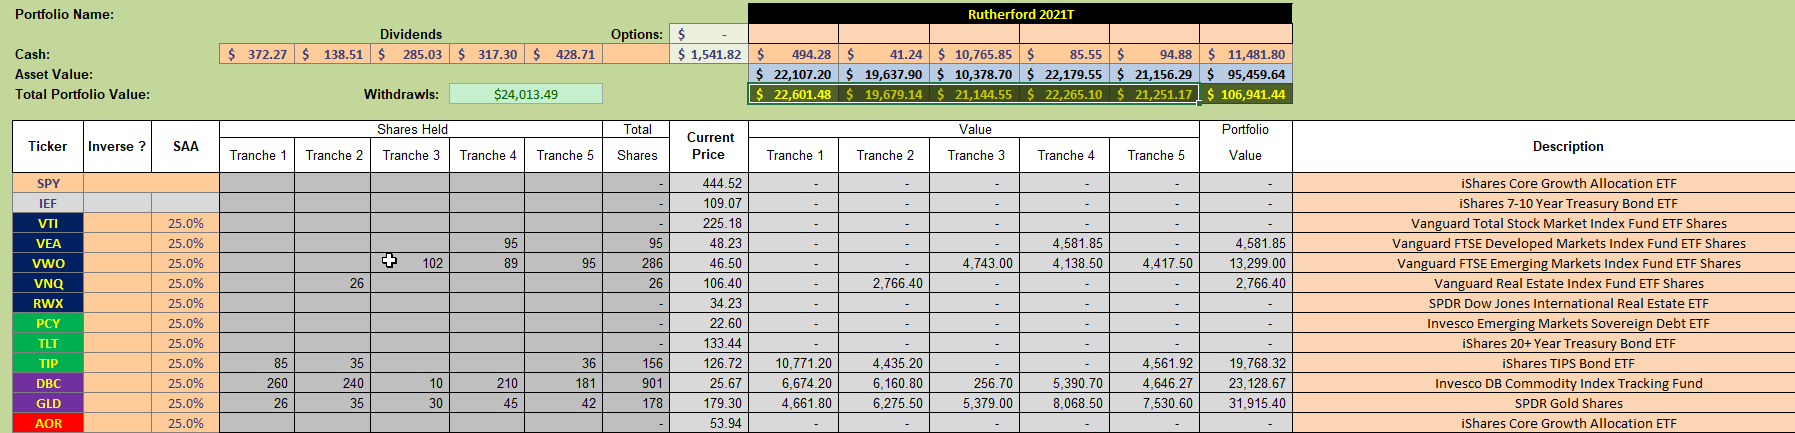 Rutherford Portfolio Review (Tranche 3): 18 March 2022 5